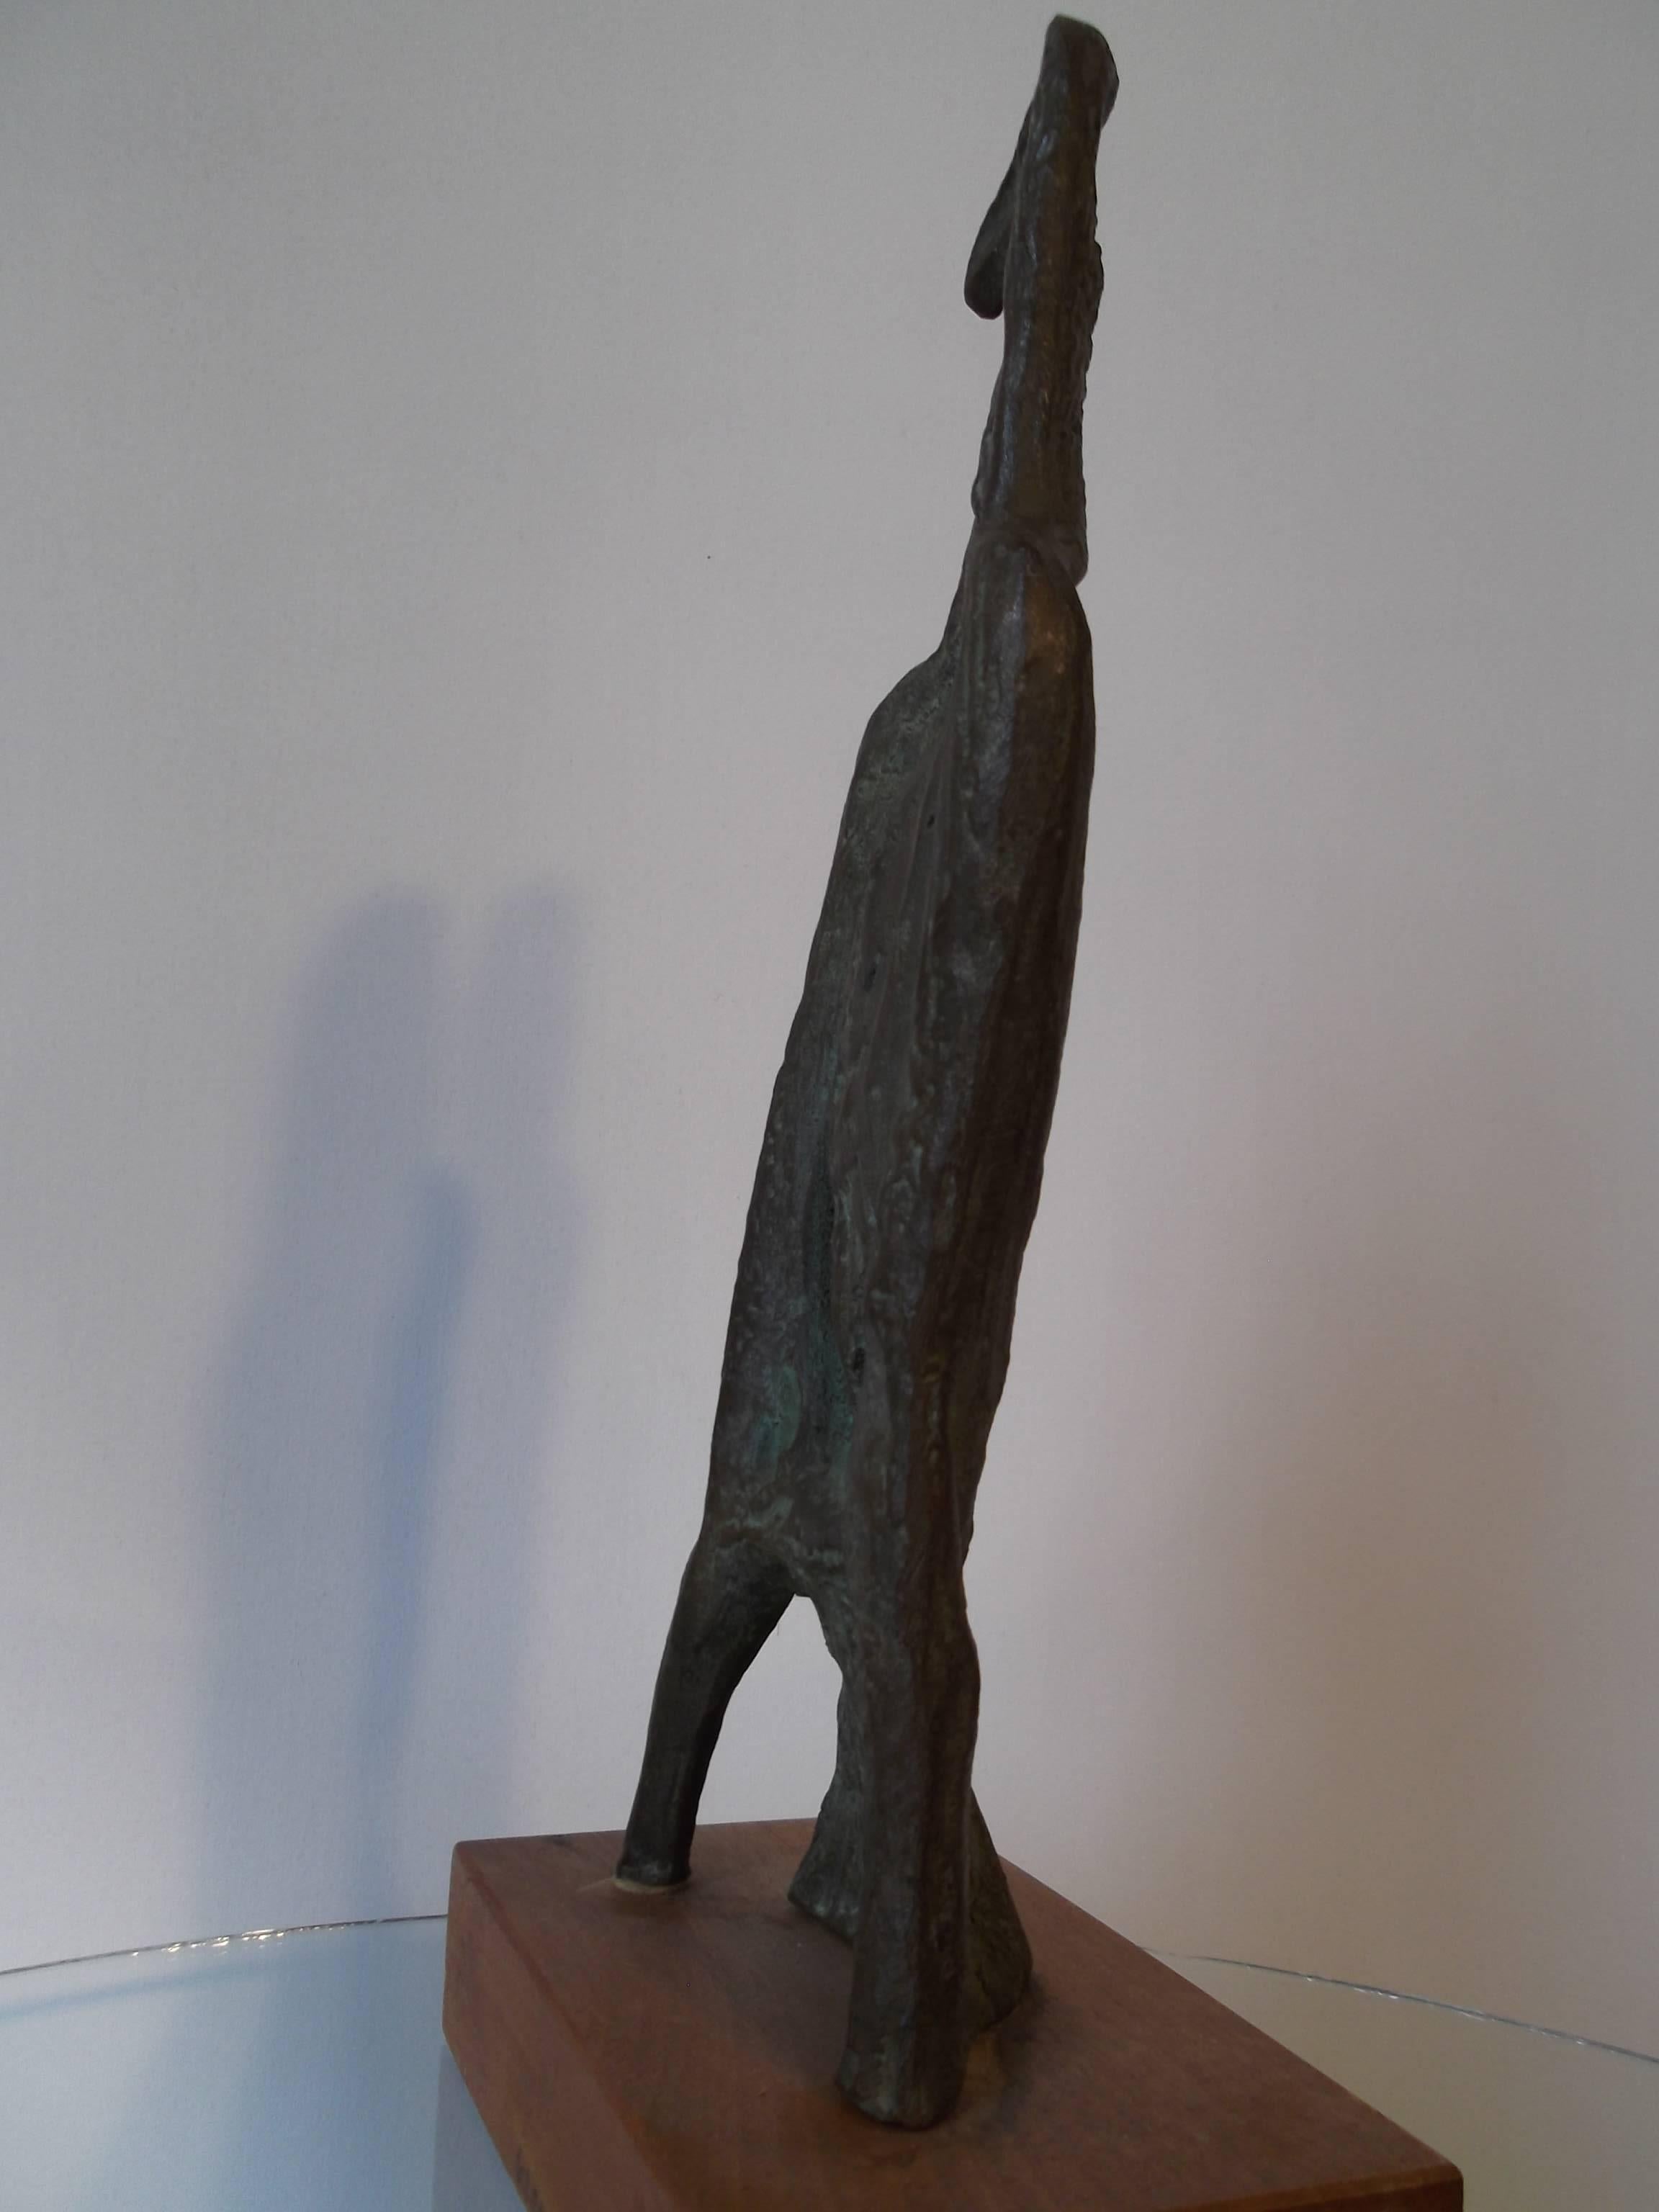 1950s Modern Art Abstract Bronze Eagle Sculpture by Klein In Good Condition For Sale In Tulsa, OK